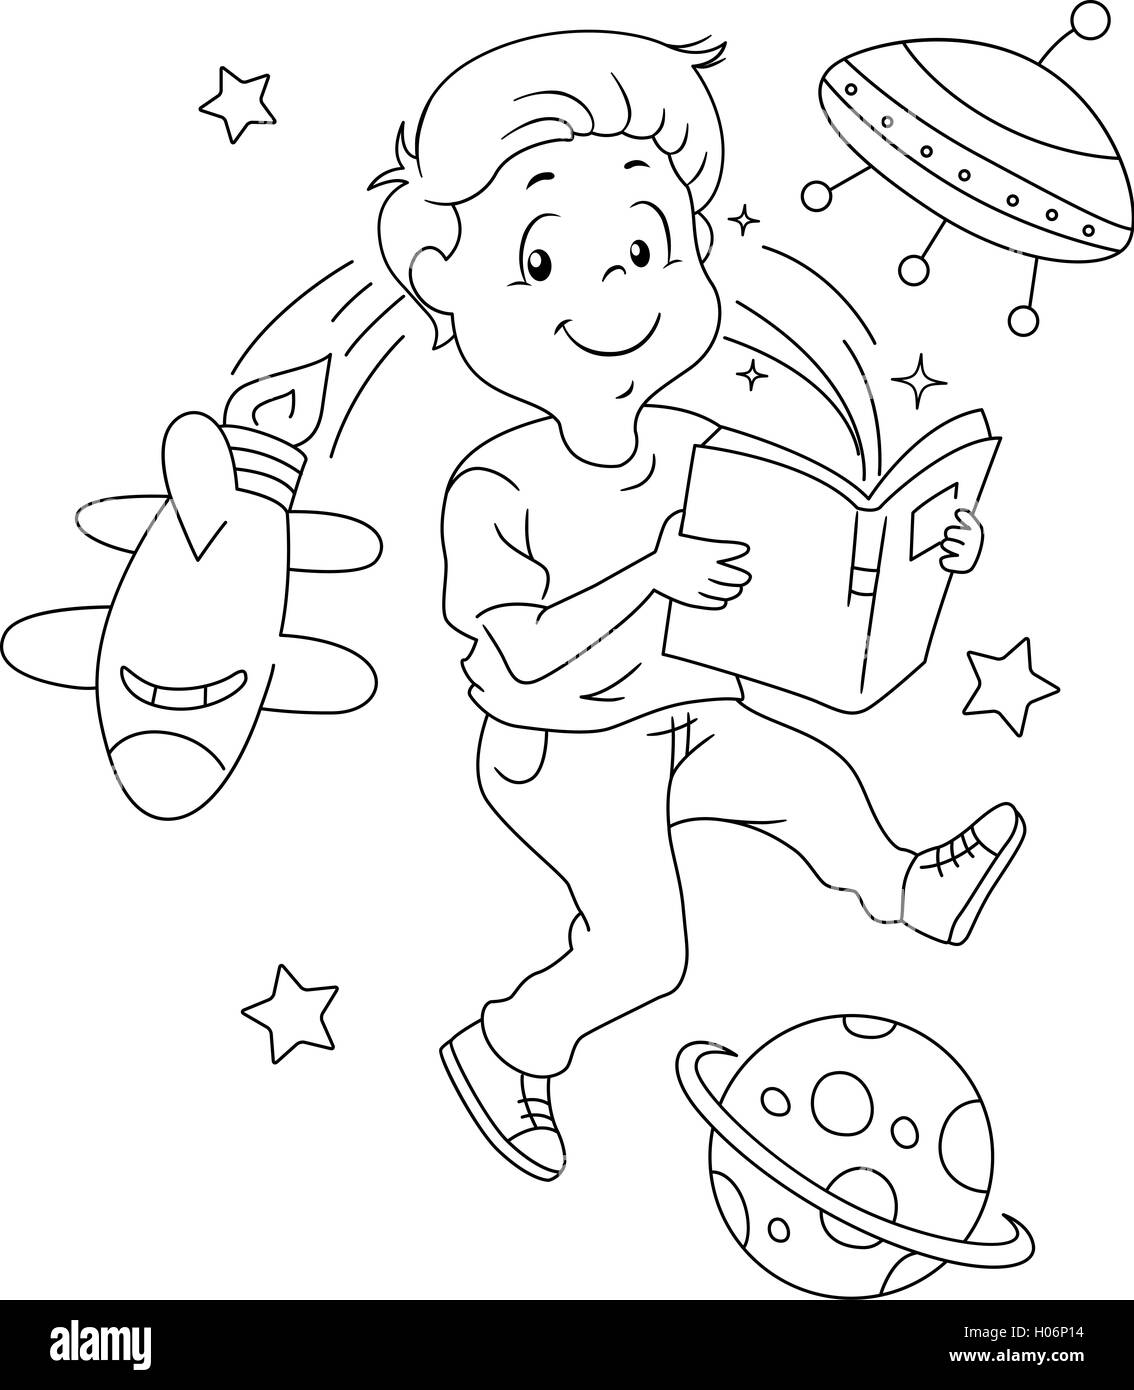 Black and White Illustration of a Space Themed Coloring Page Stock Photo